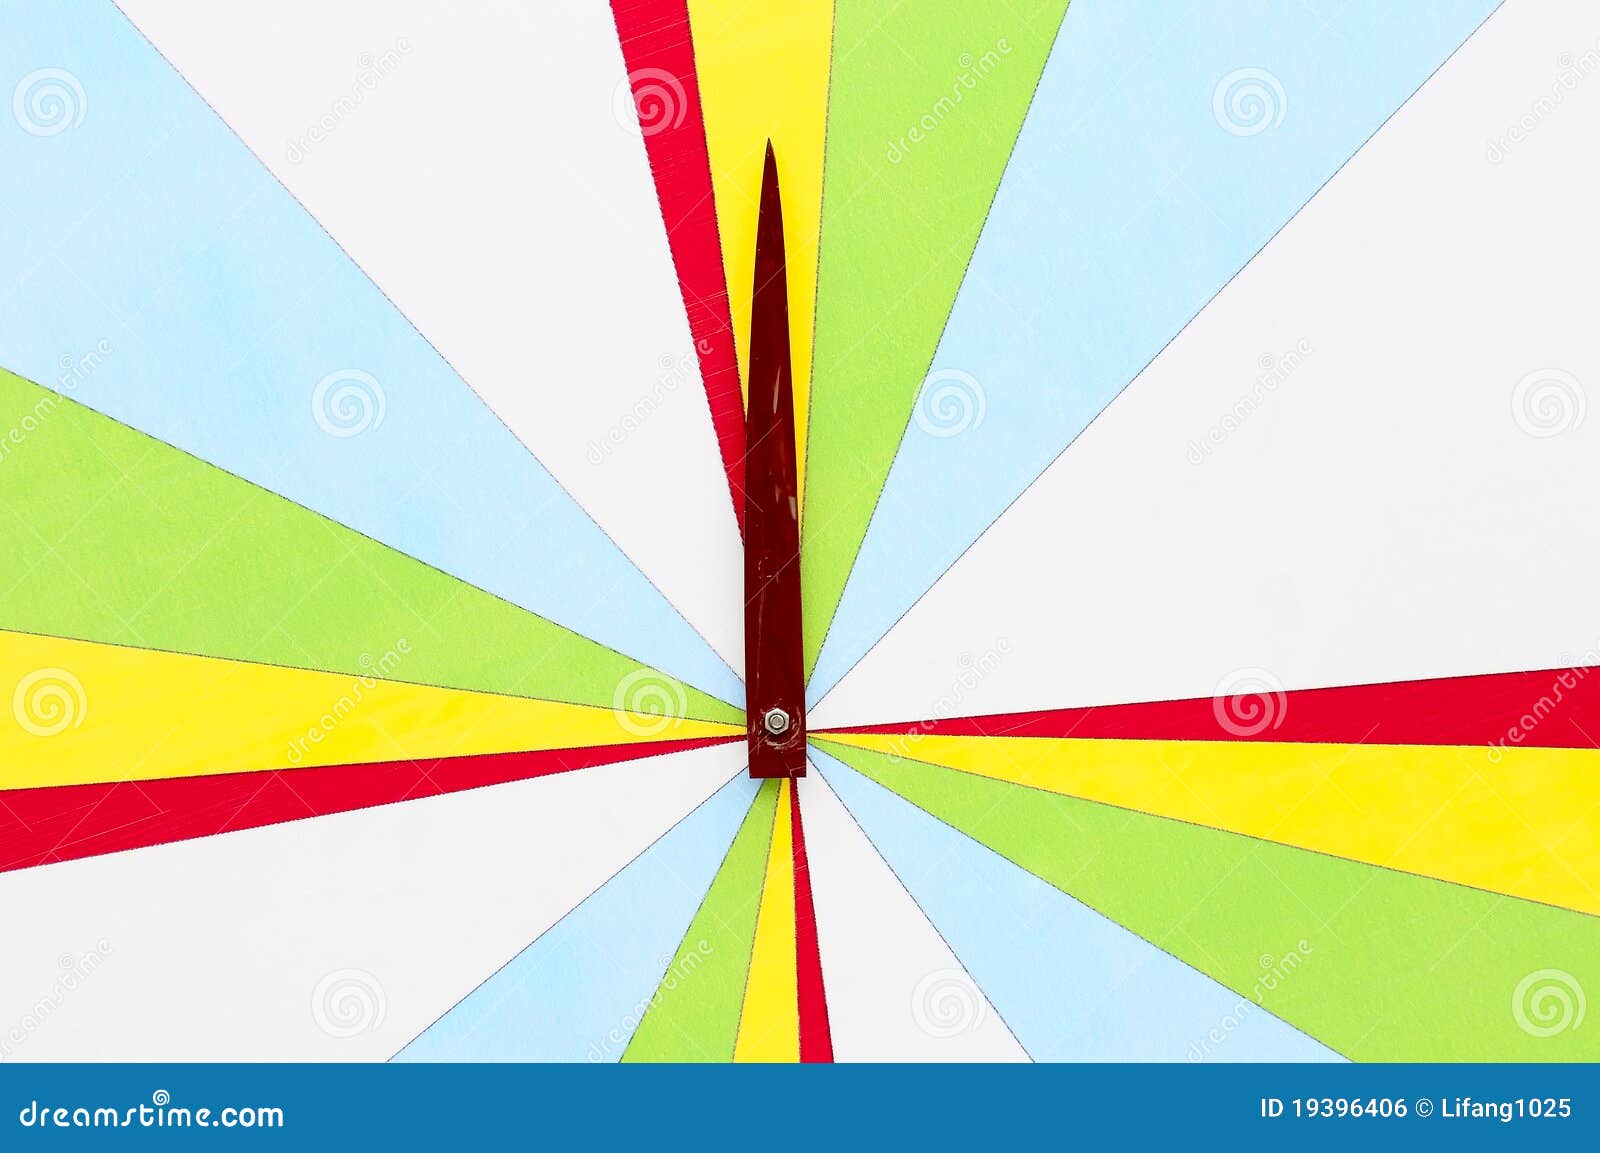 Color roulette stock photo. Image of blue, point, yellow - 19396406